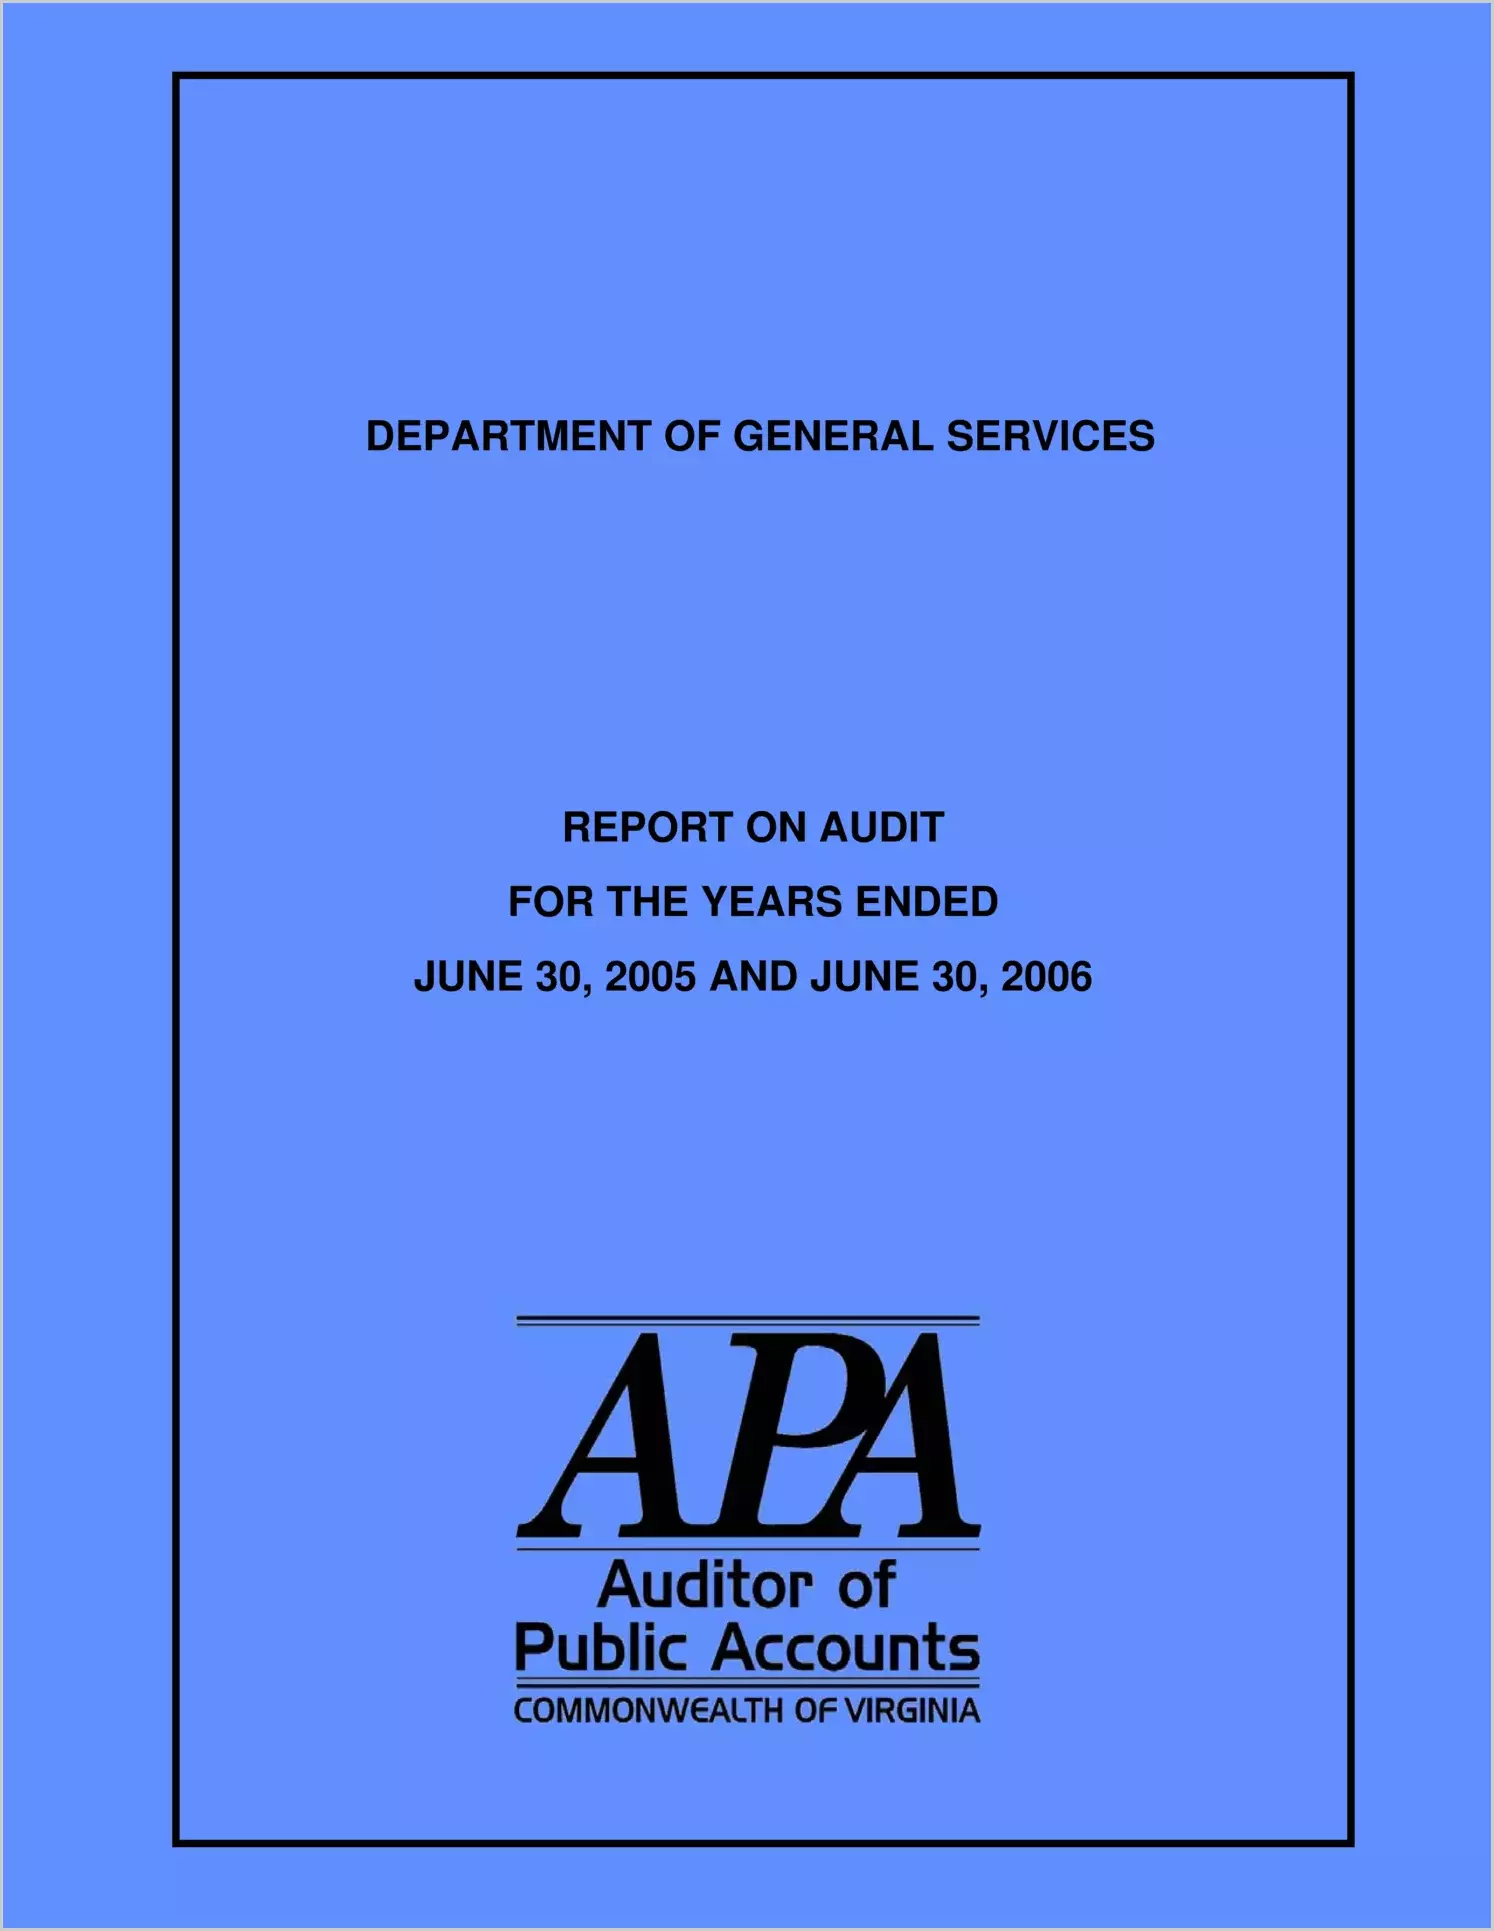 Department of General Services for the years ended June 30, 2005 and June 30, 2006